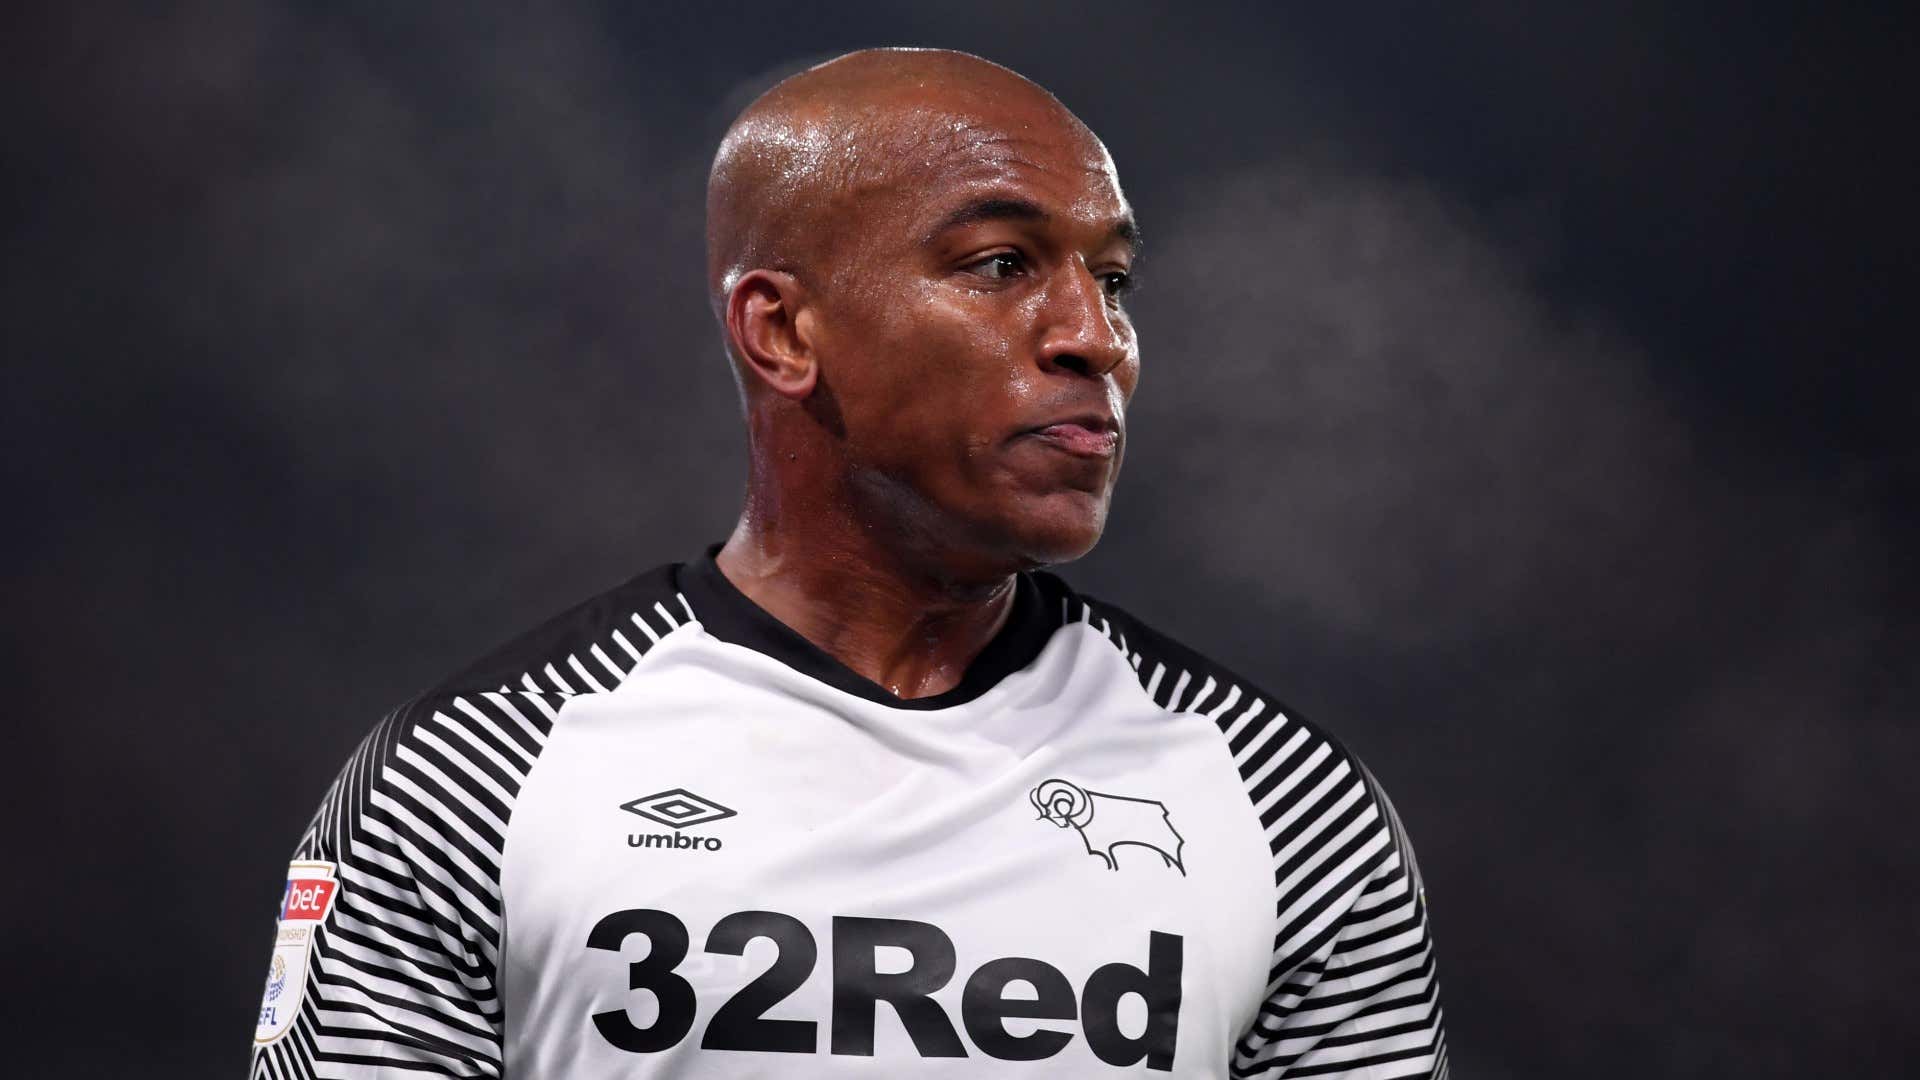 Andre Wisdom Derby 2020